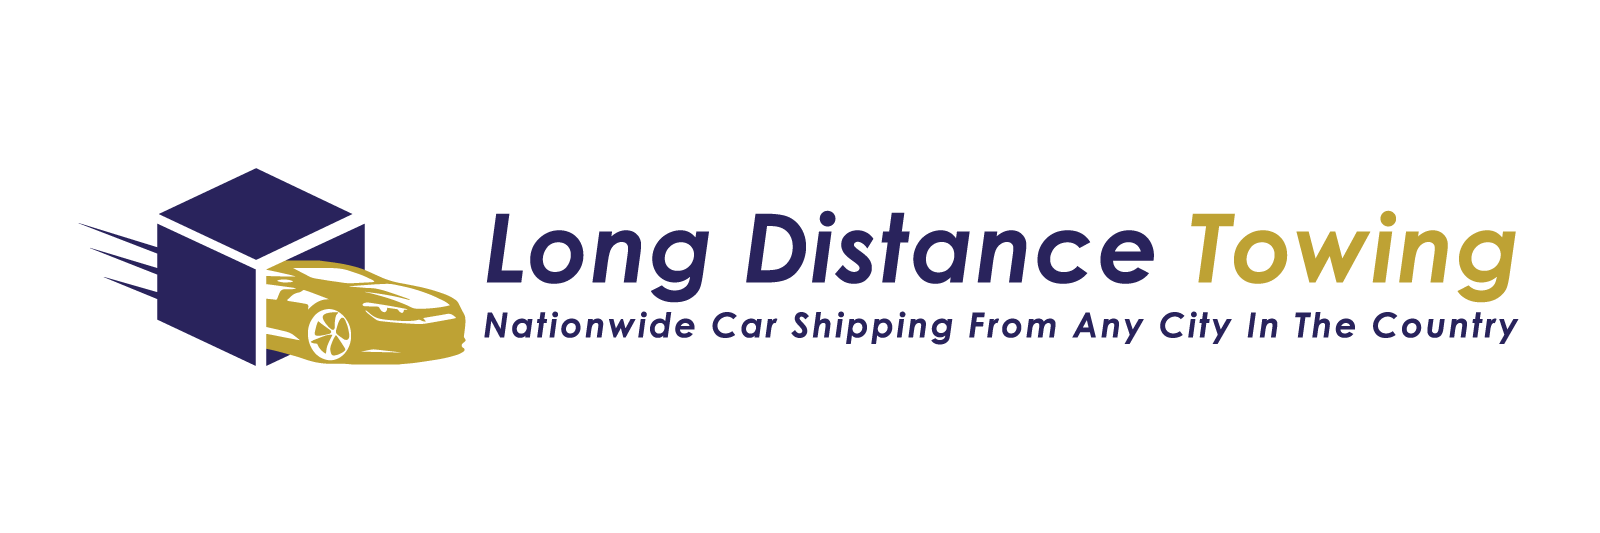 National Car Shipping Inc.  Towing.com Profile Banner